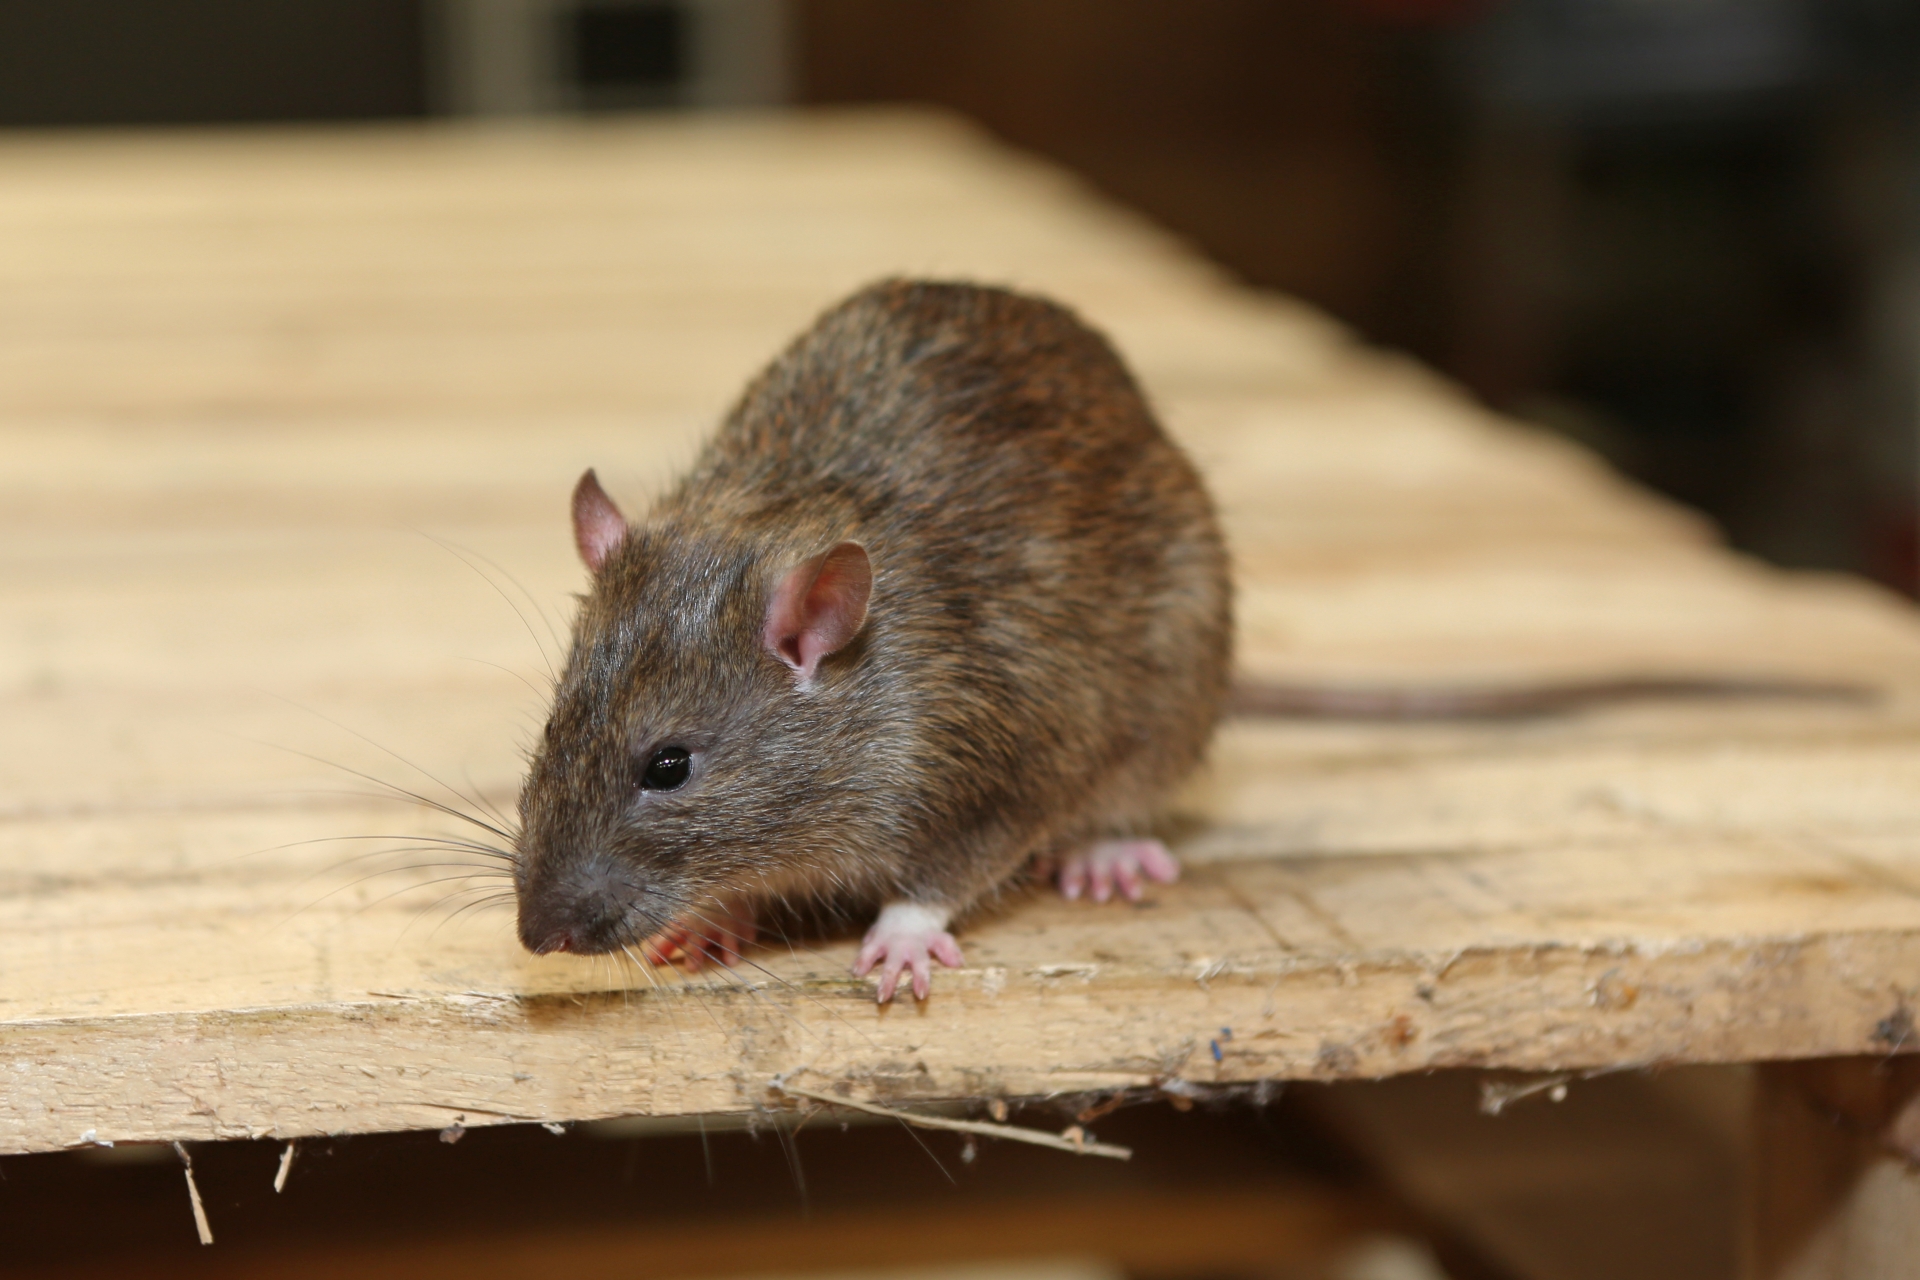 Rat Control, Pest Control in Kensal Green, NW10. Call Now 020 8166 9746